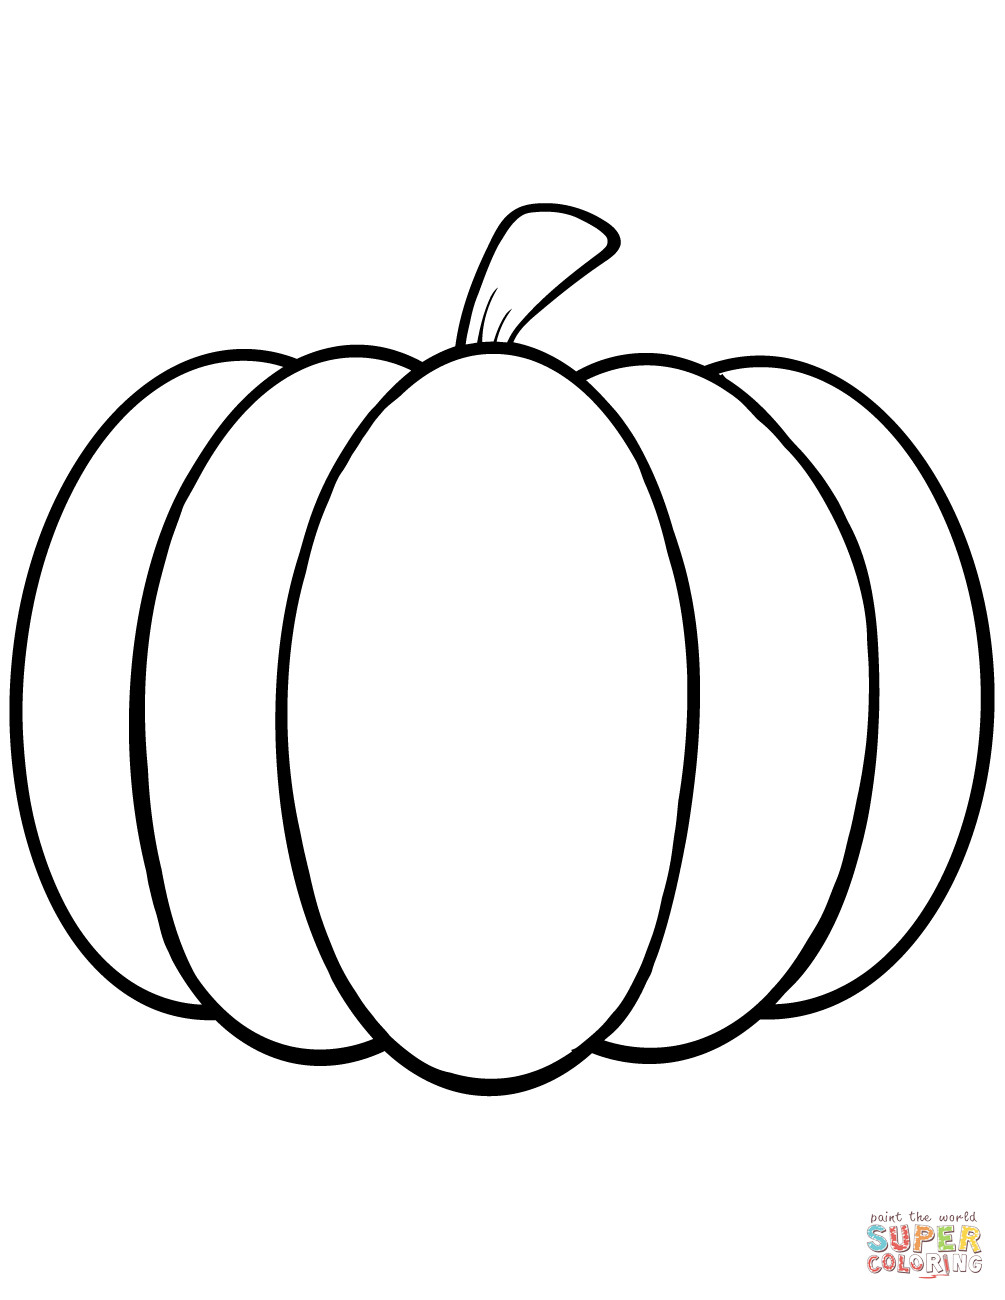 Pumpkin Coloring Pages For Kids
 Simple Pumpkin coloring page